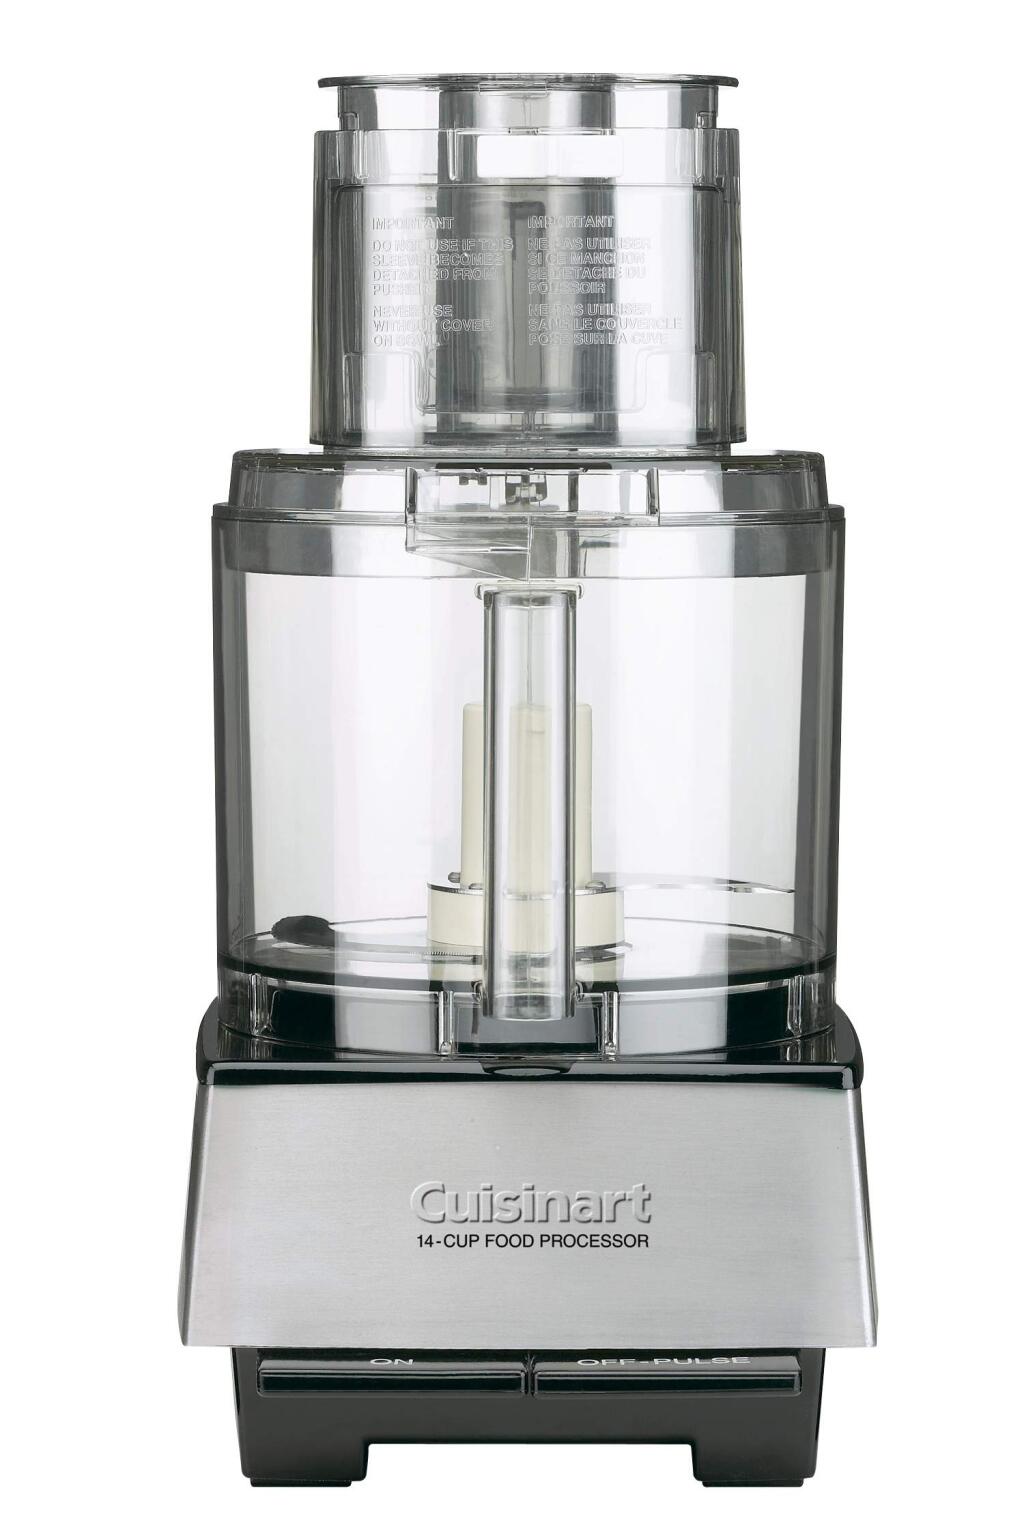 An example of a Cuisinart food processor with riveted blades. (WWW.CPSC.GOV)